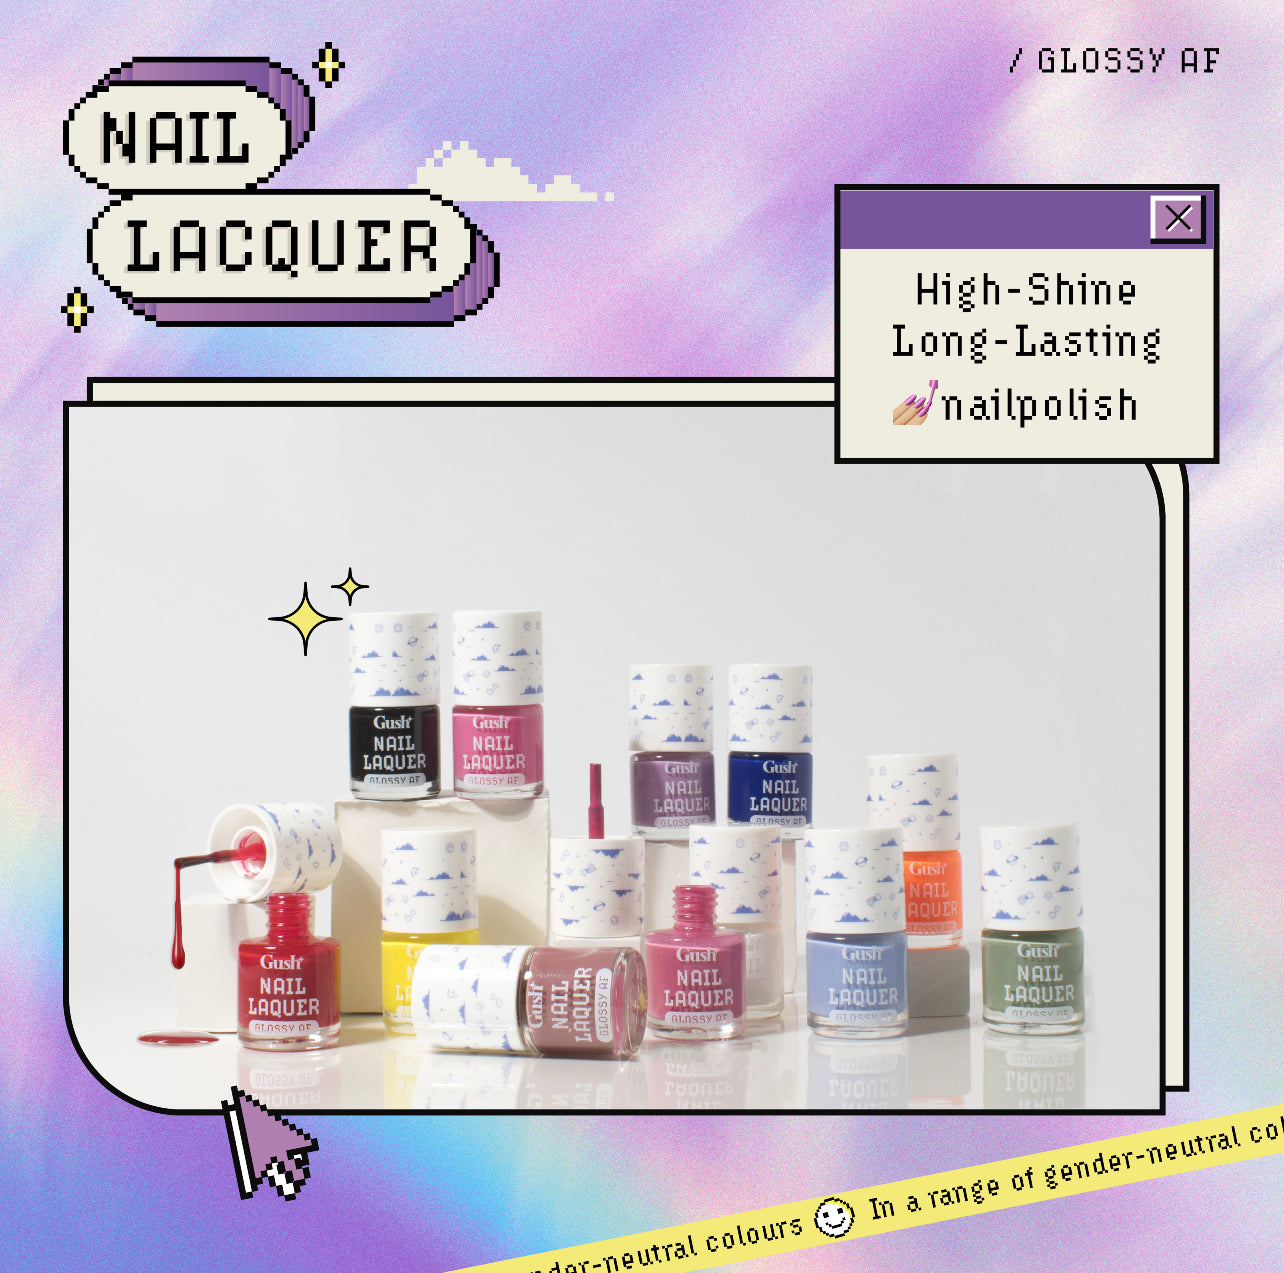 Meet All Our Nail Paints!